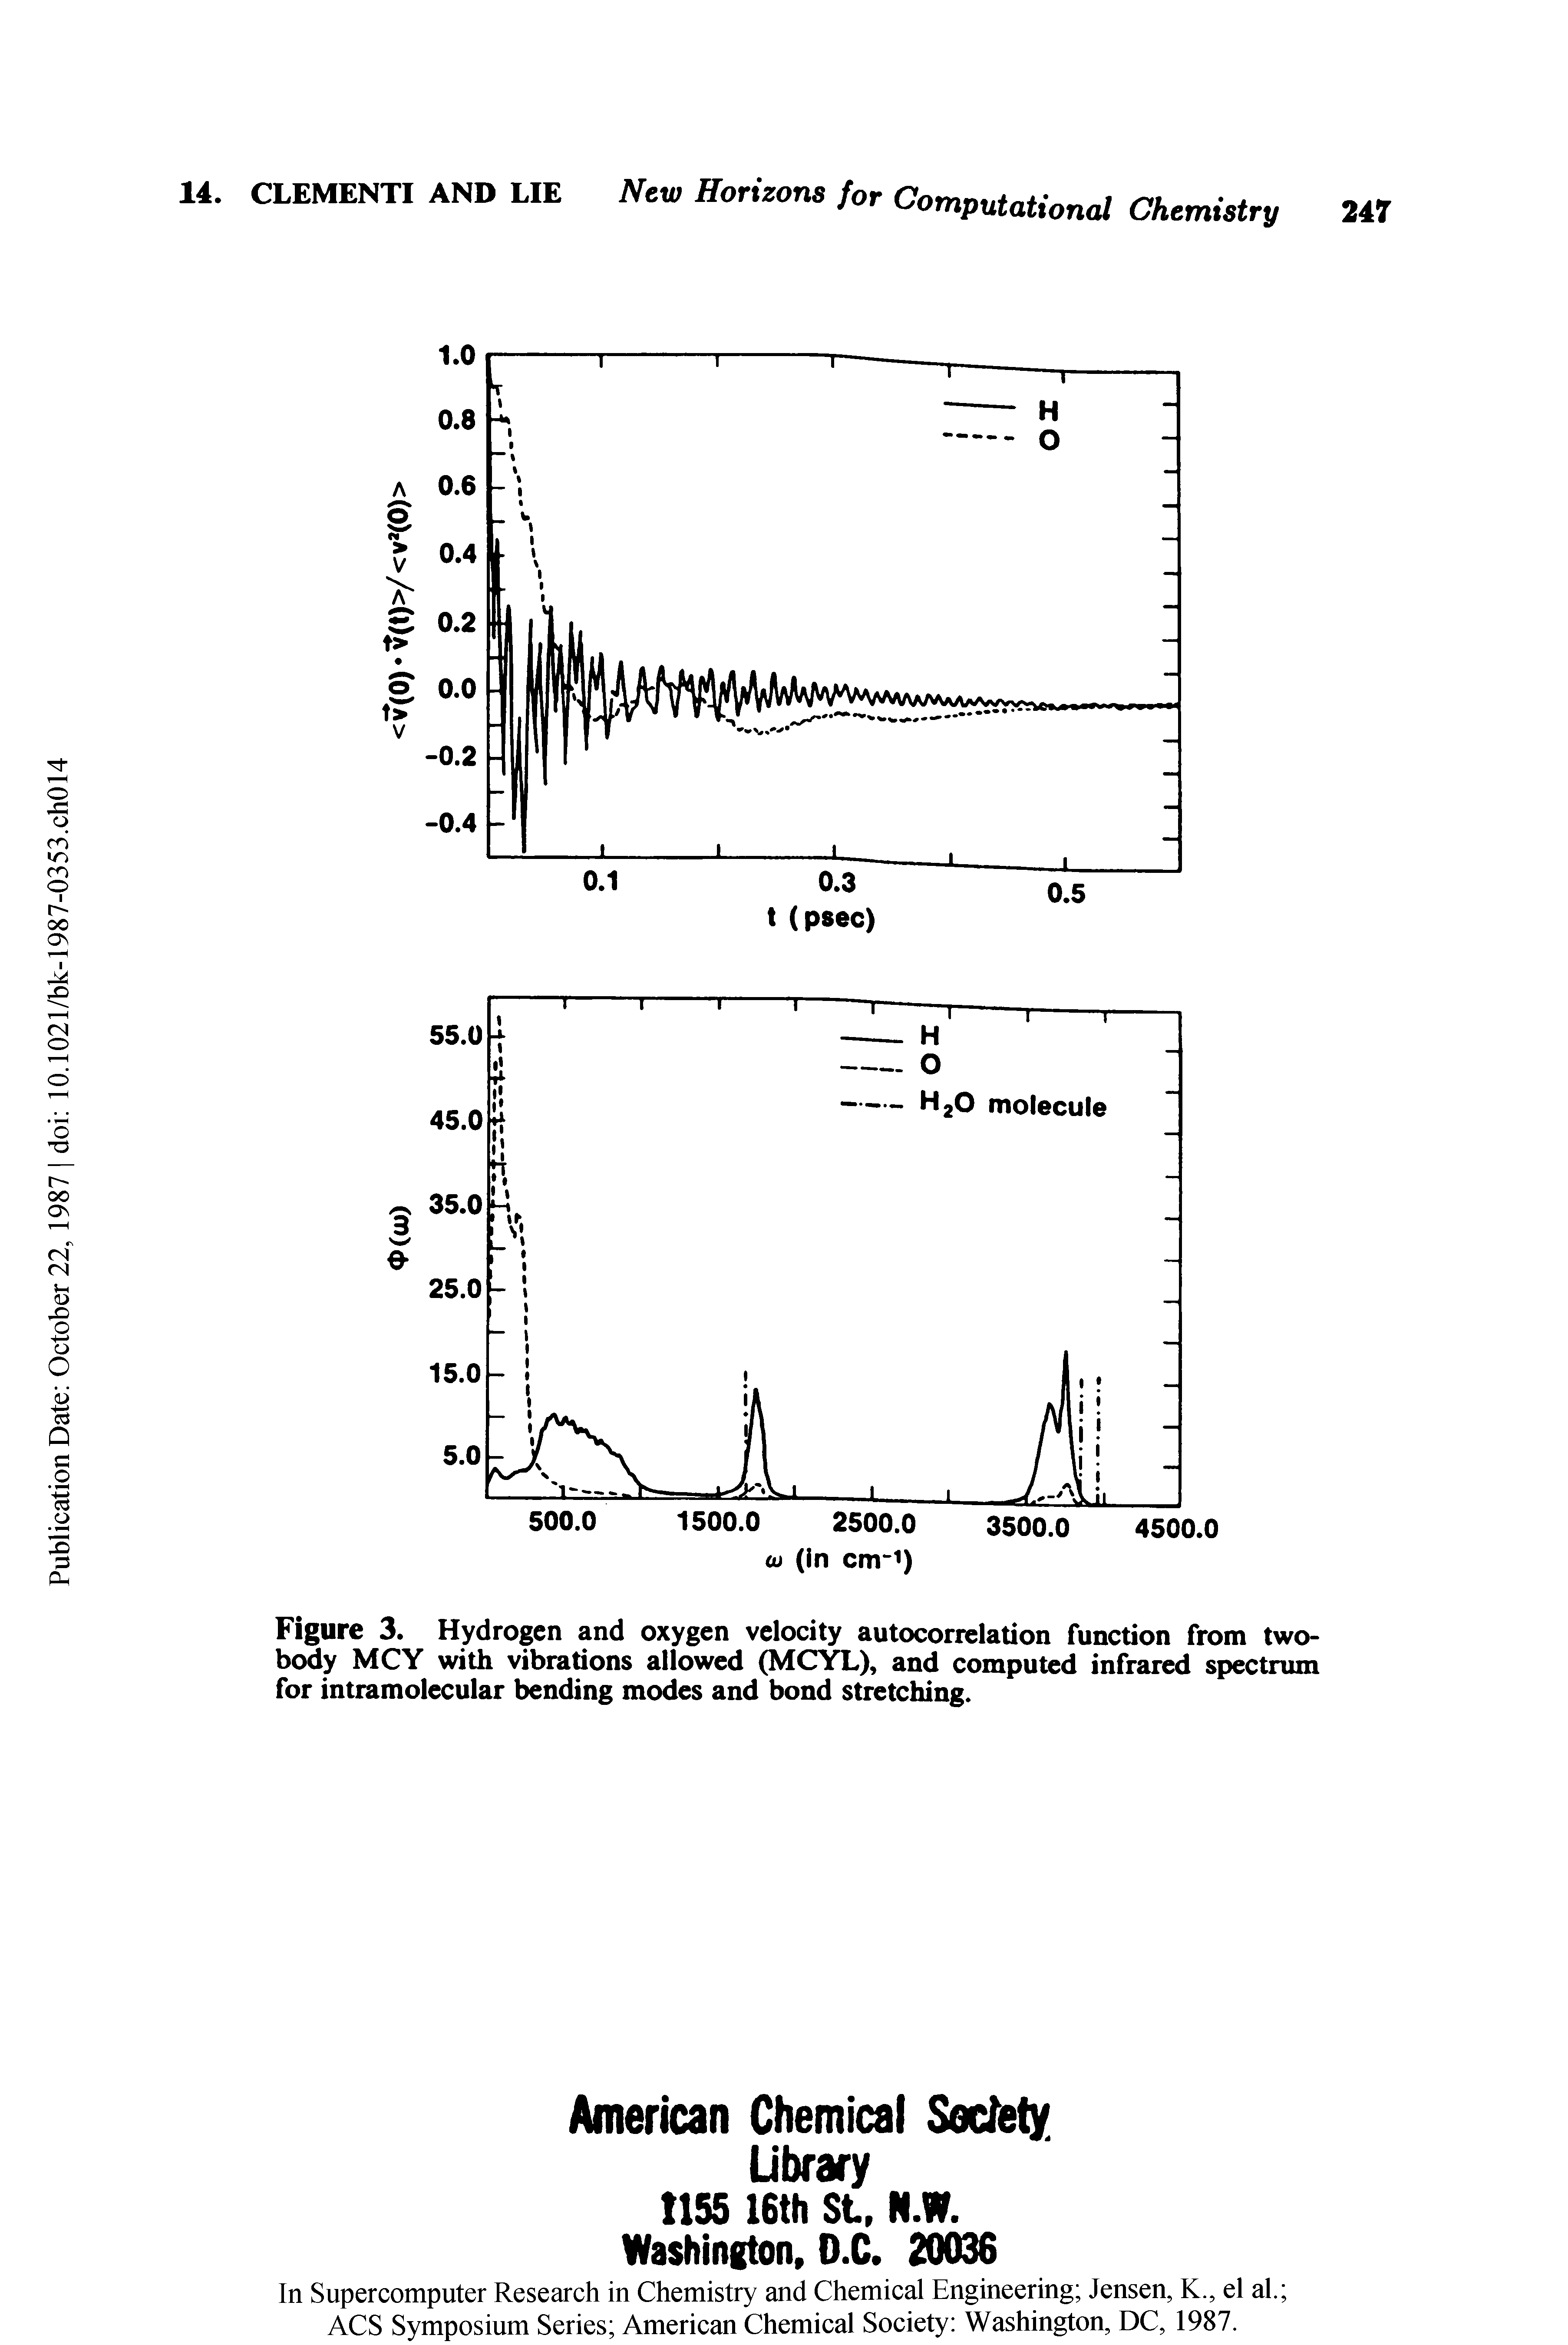 Figure 3. Hydrogen and oxygen velocity autocorrelation function from two-body MCY with vibrations allowed (MCYL), and computed infrared spectrum for intramolecular bending modes and bond stretching.